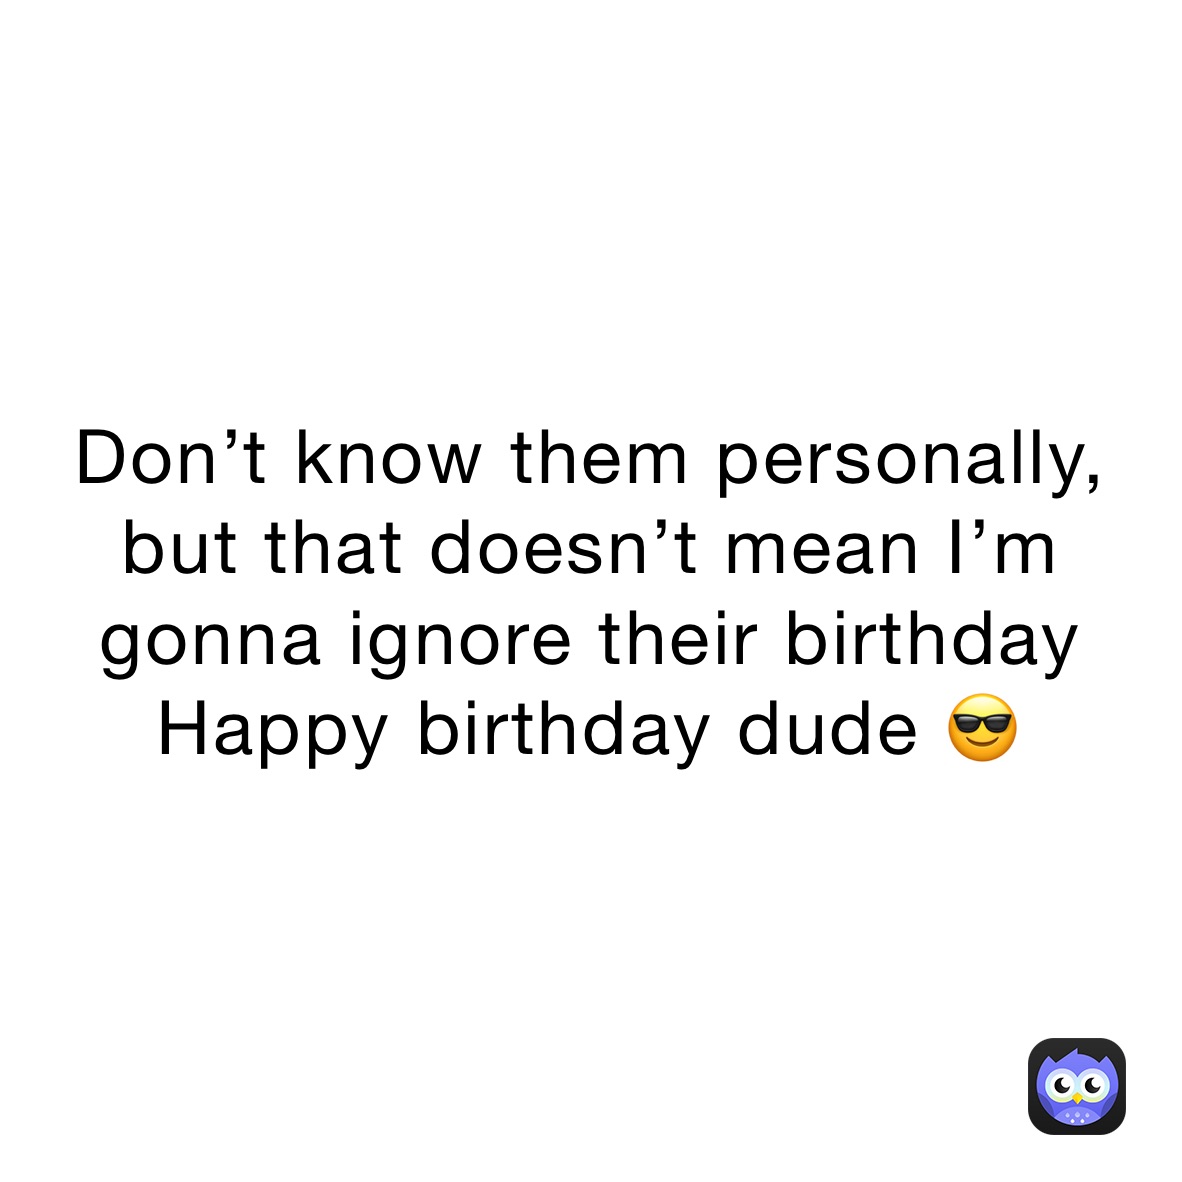 Don’t know them personally,
but that doesn’t mean I’m gonna ignore their birthday
Happy birthday dude 😎